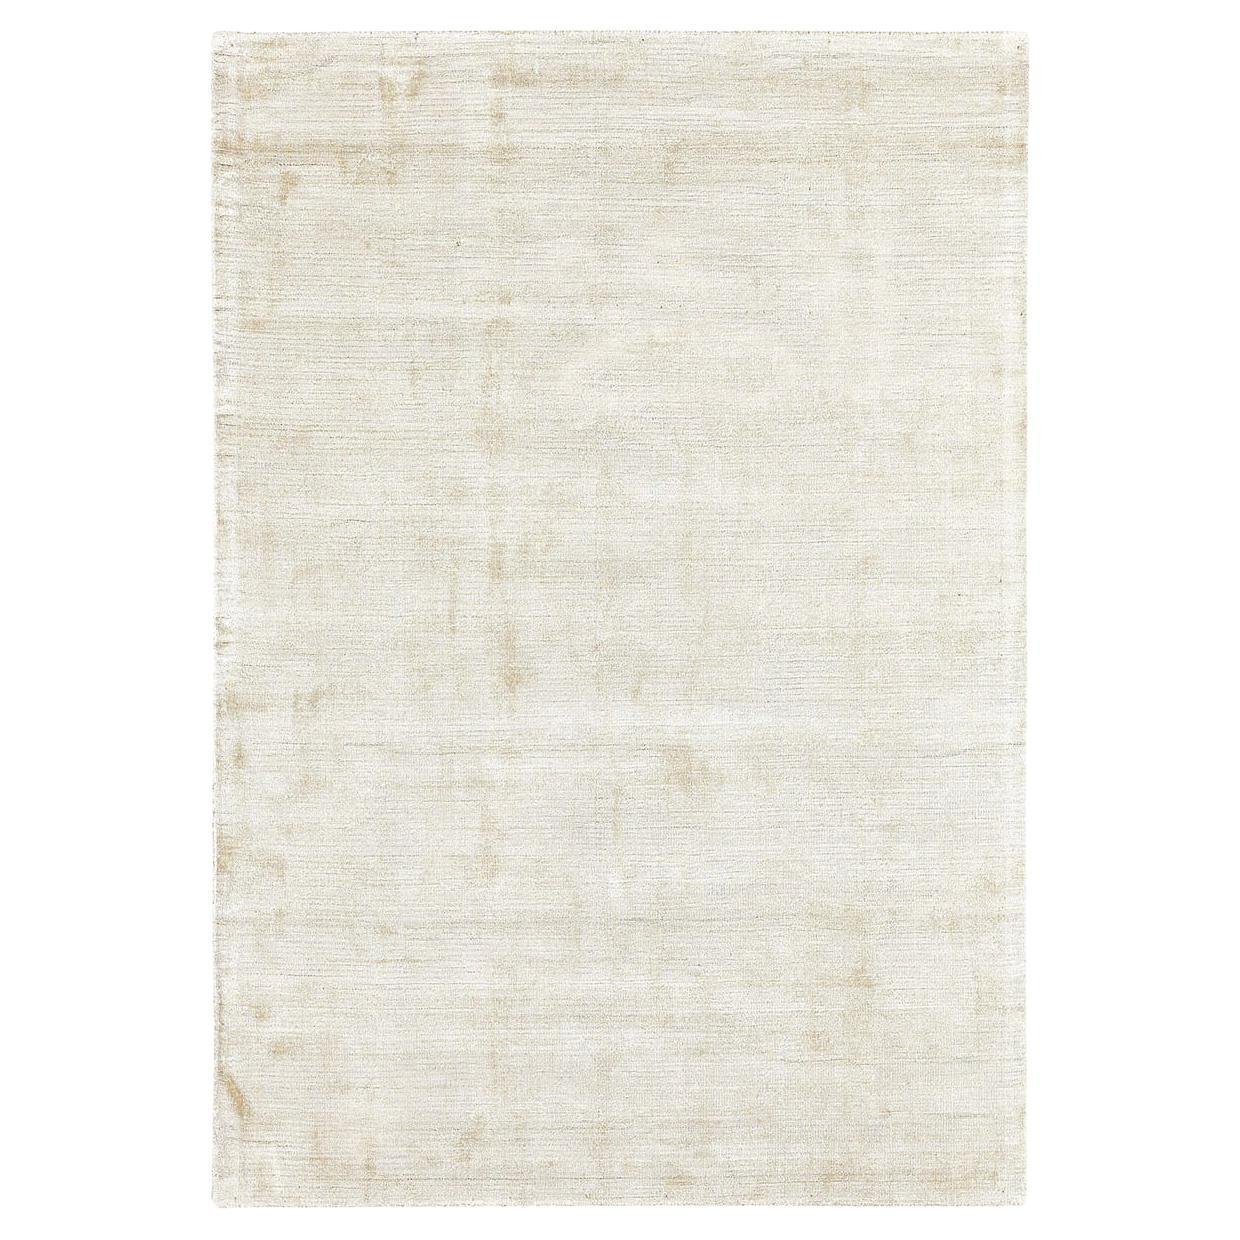 Trendy Shiny Ivory Rug For Sale